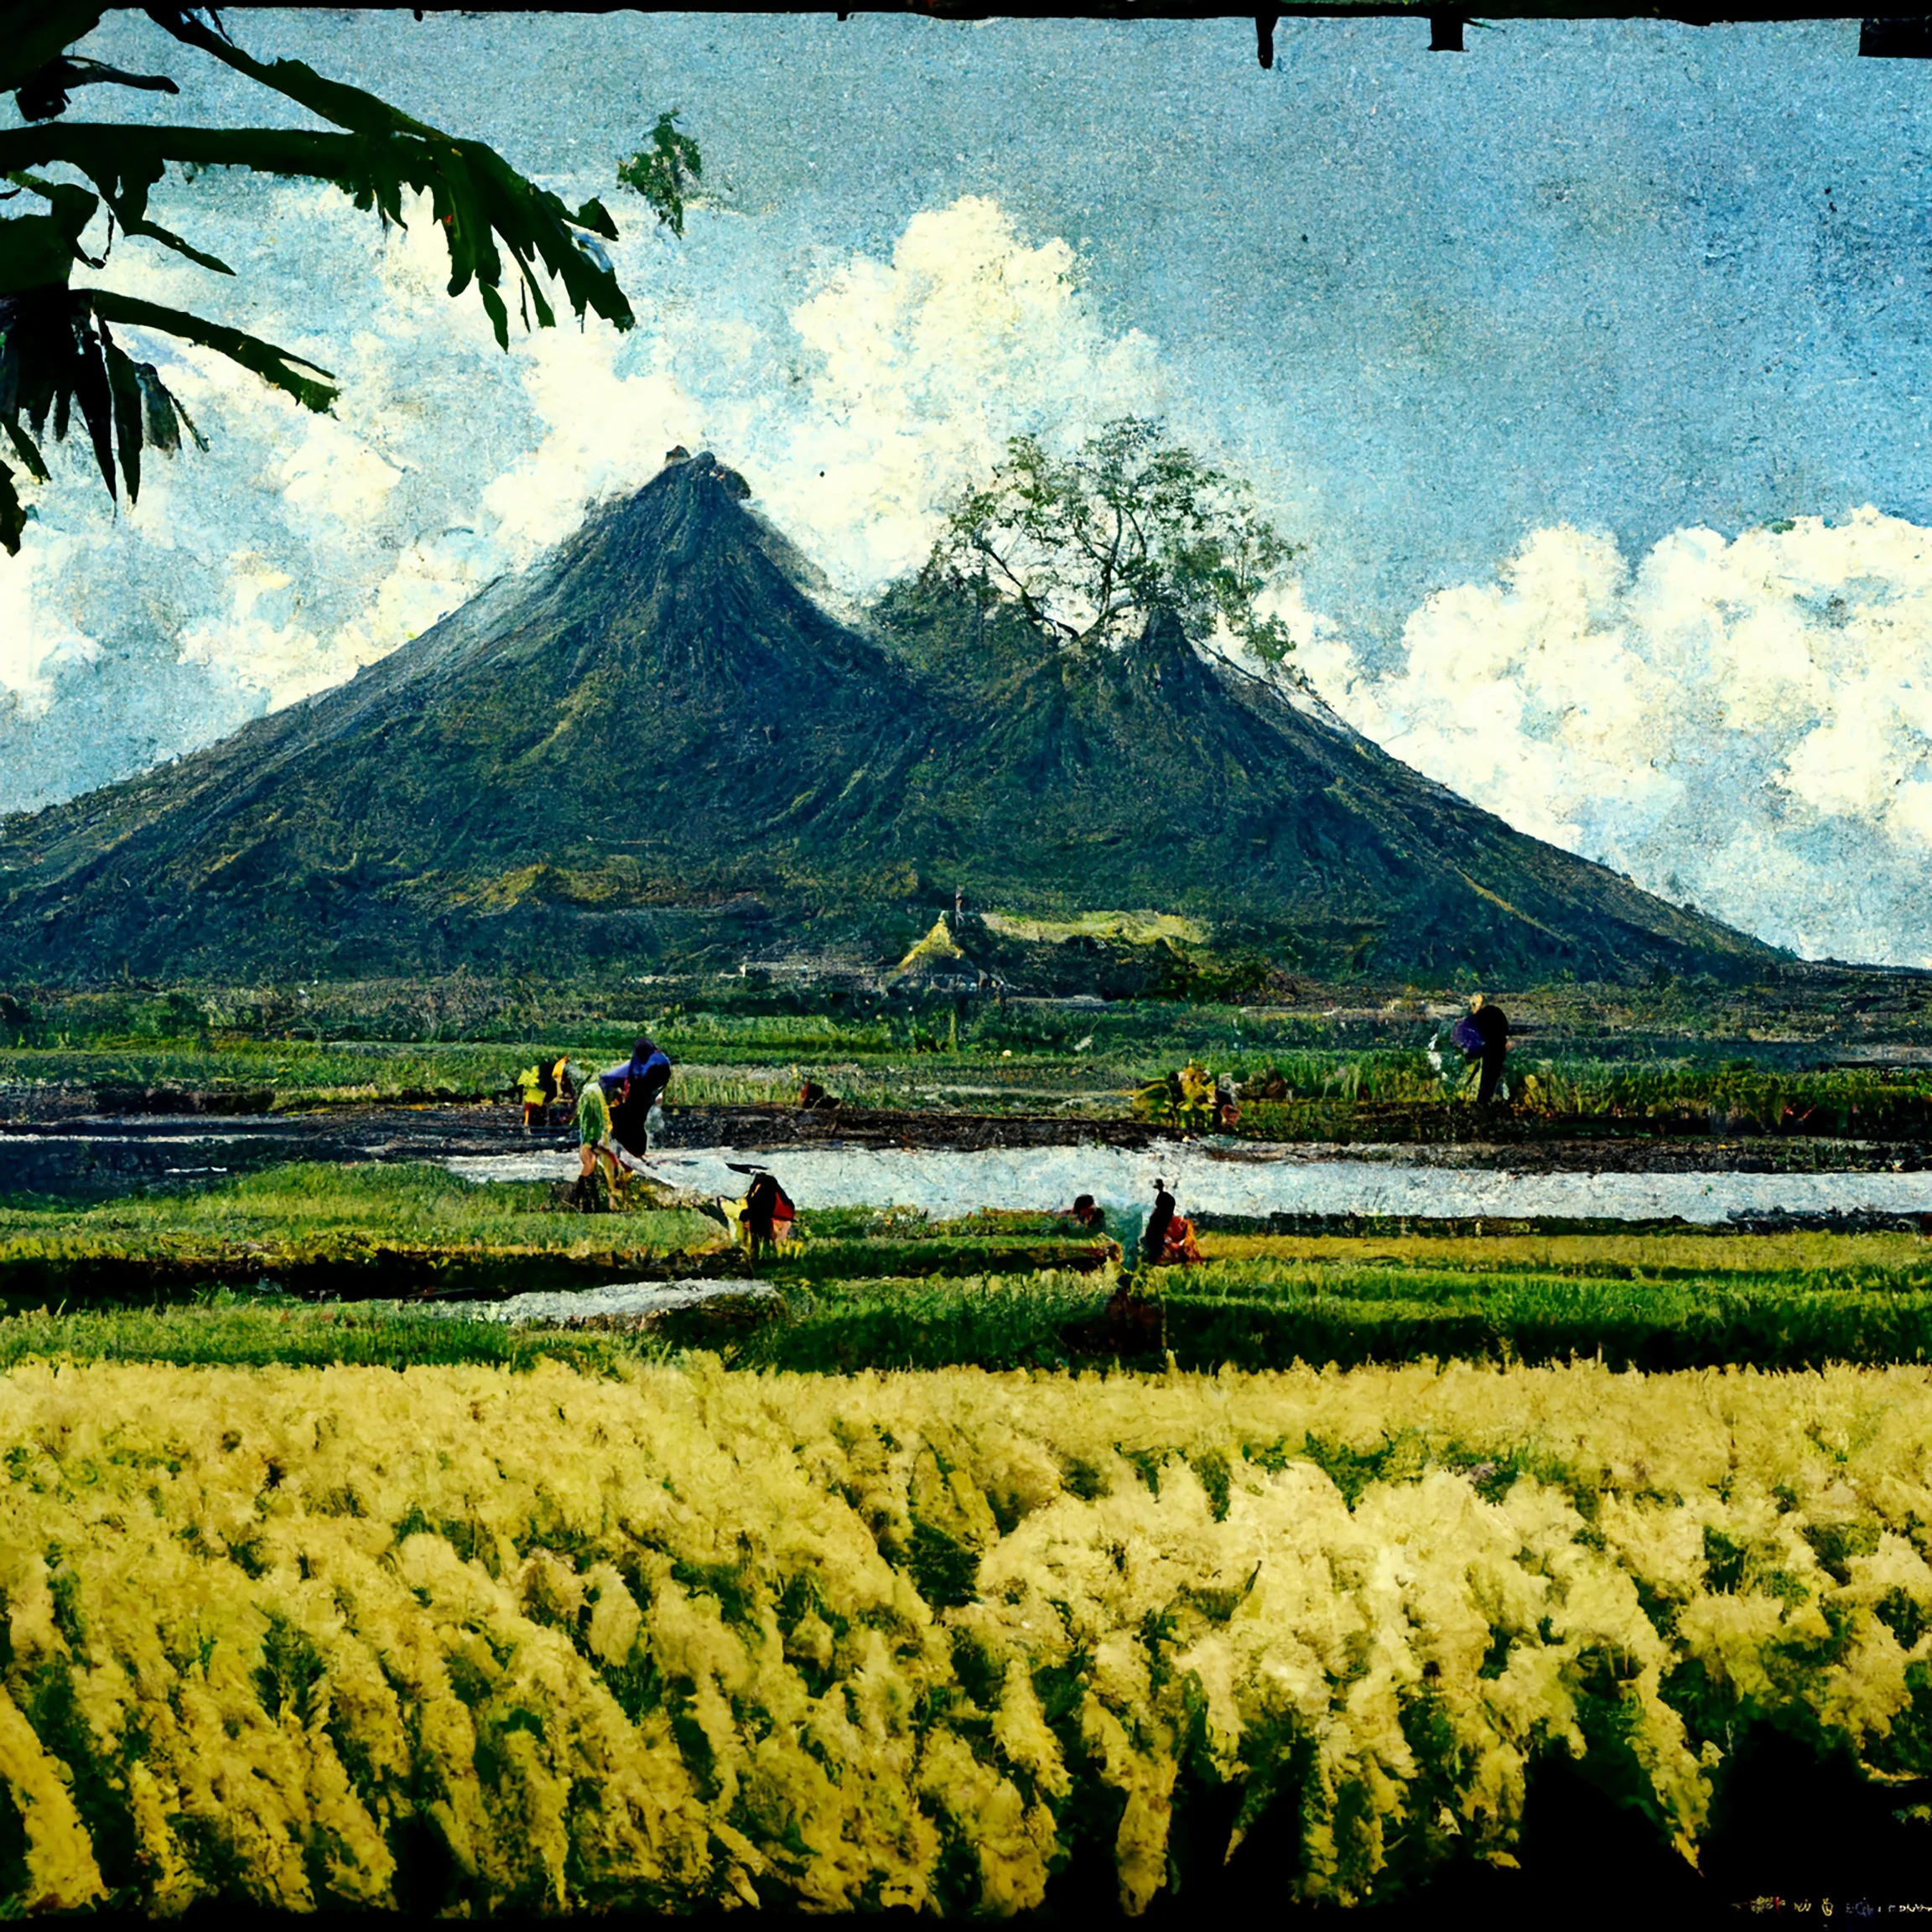 stephentalla Philippines men and women planting rice mayon volc 8ff62886 86f7 4869 8791 971c5dd31519 jpg The Imperials of Baao Camarines Sur